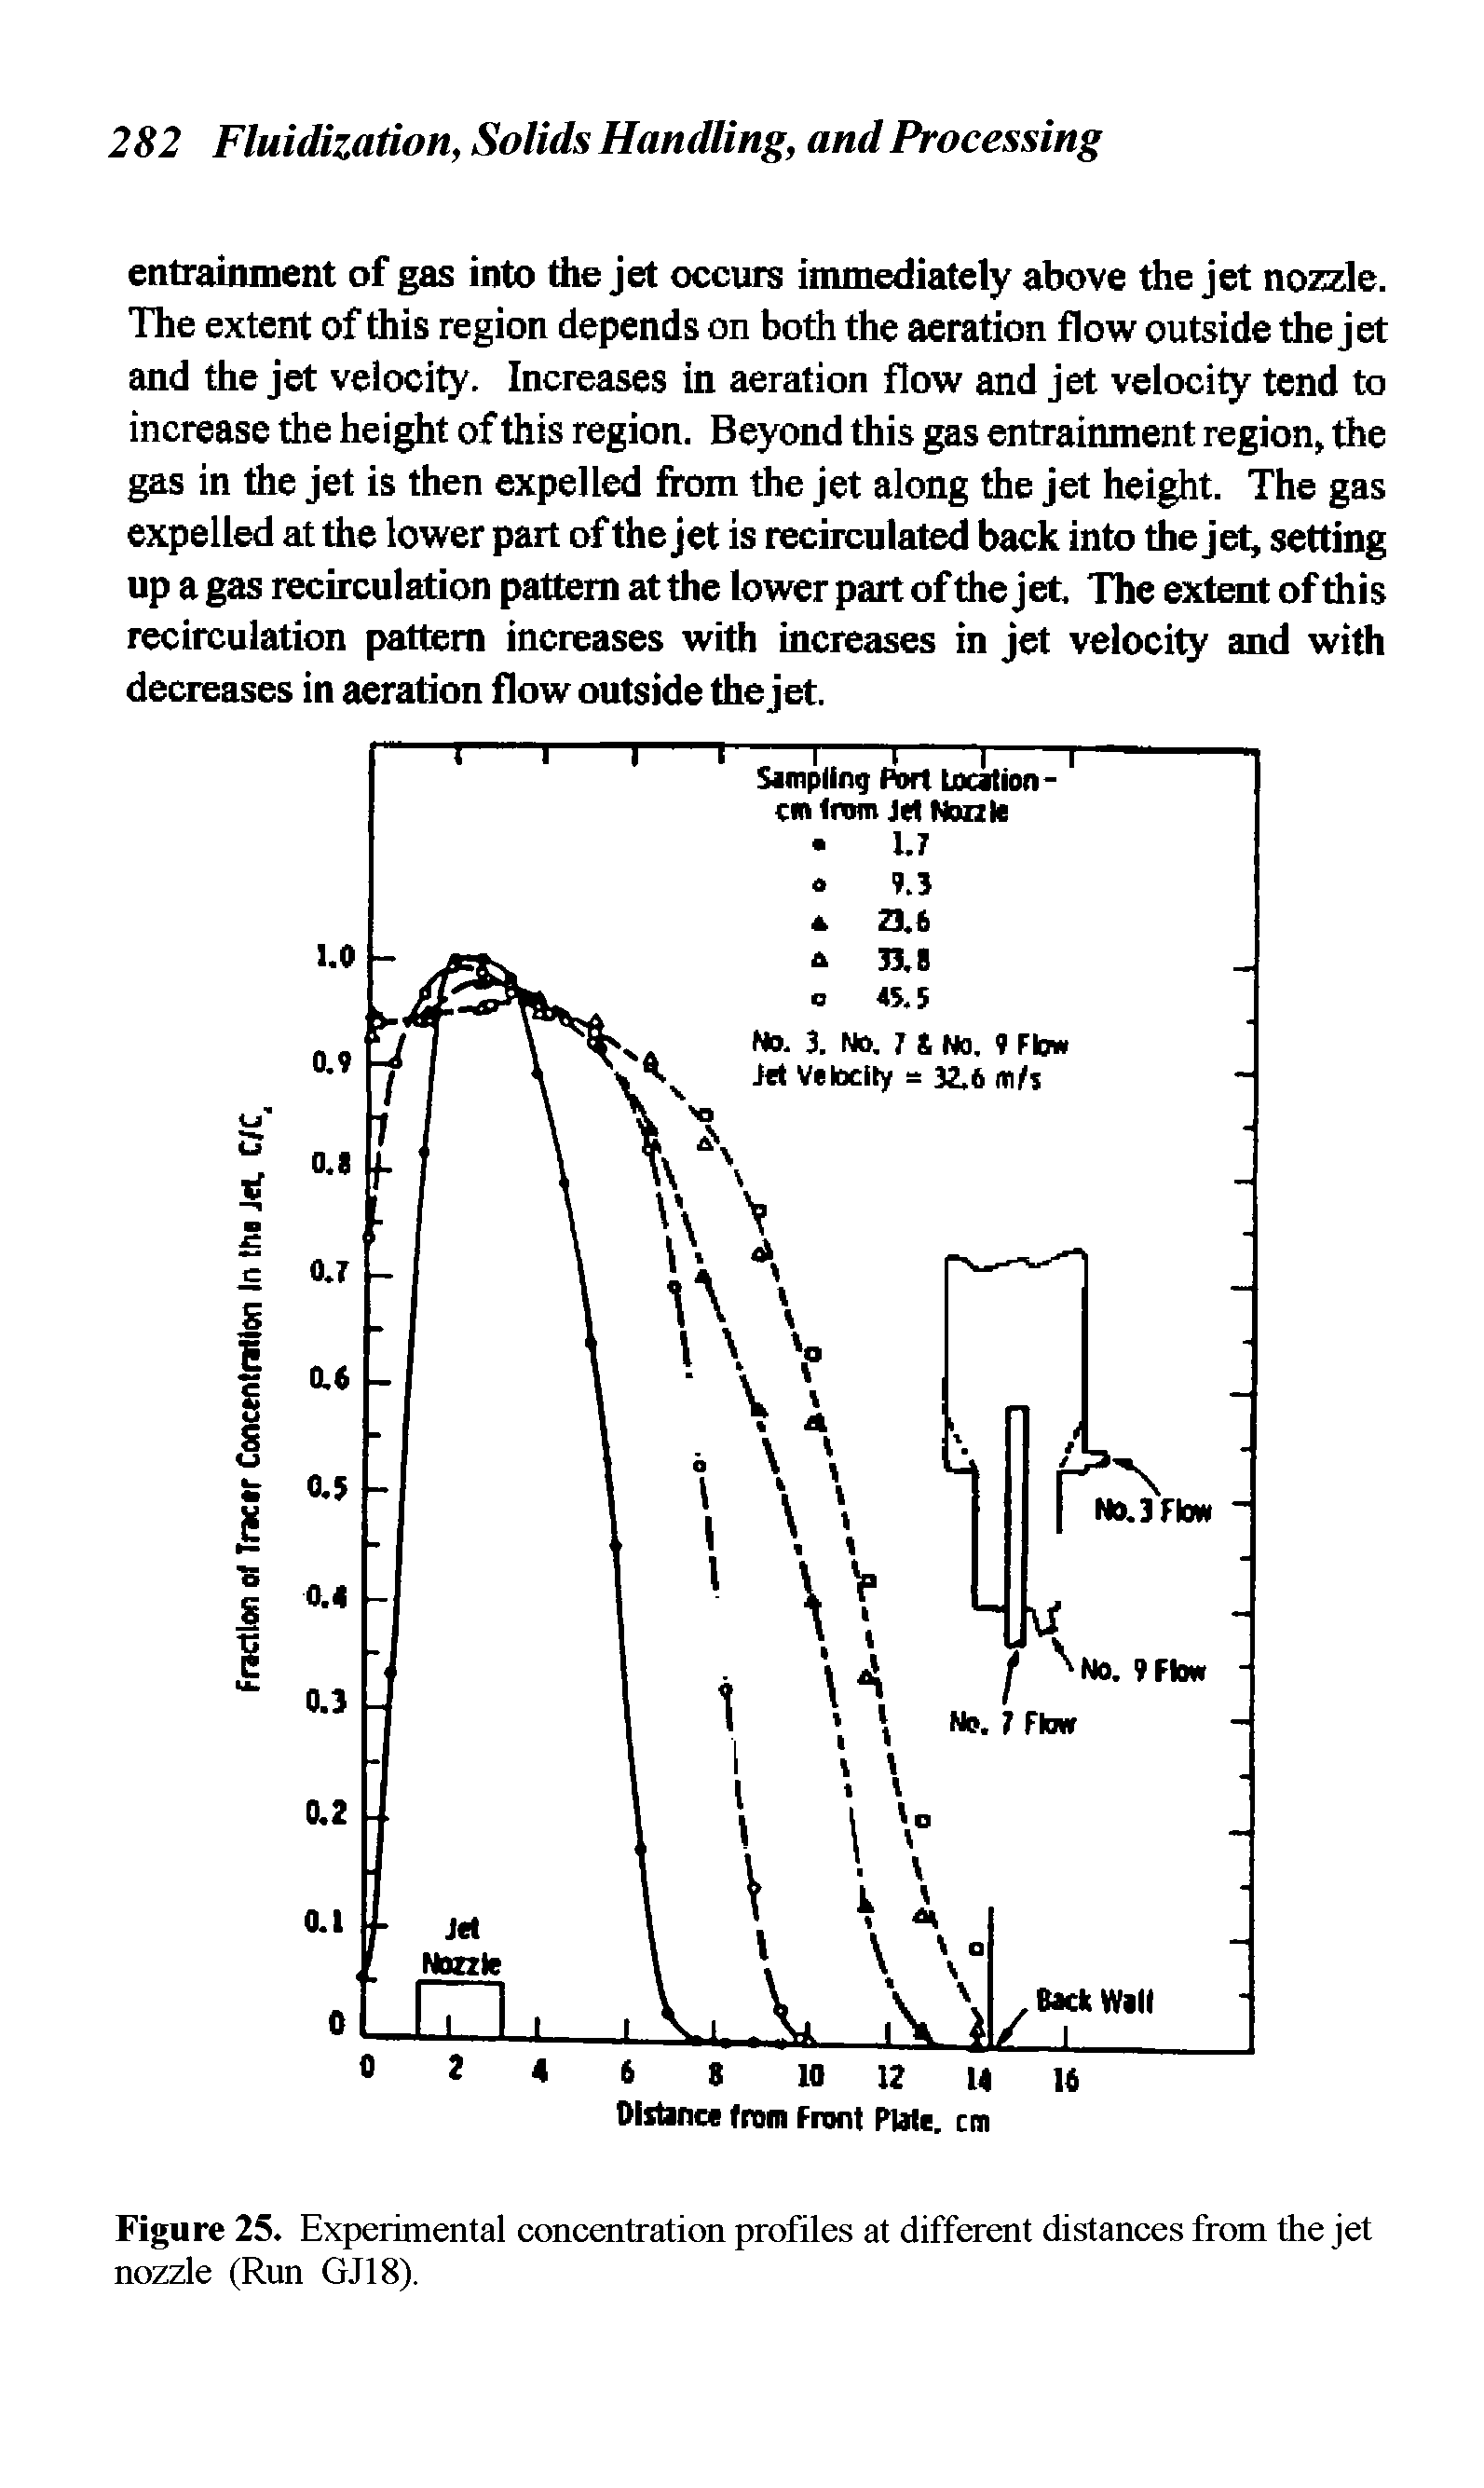 Figure 25. Experimental concentration profiles at different distances from the jet nozzle (Run GJ18).